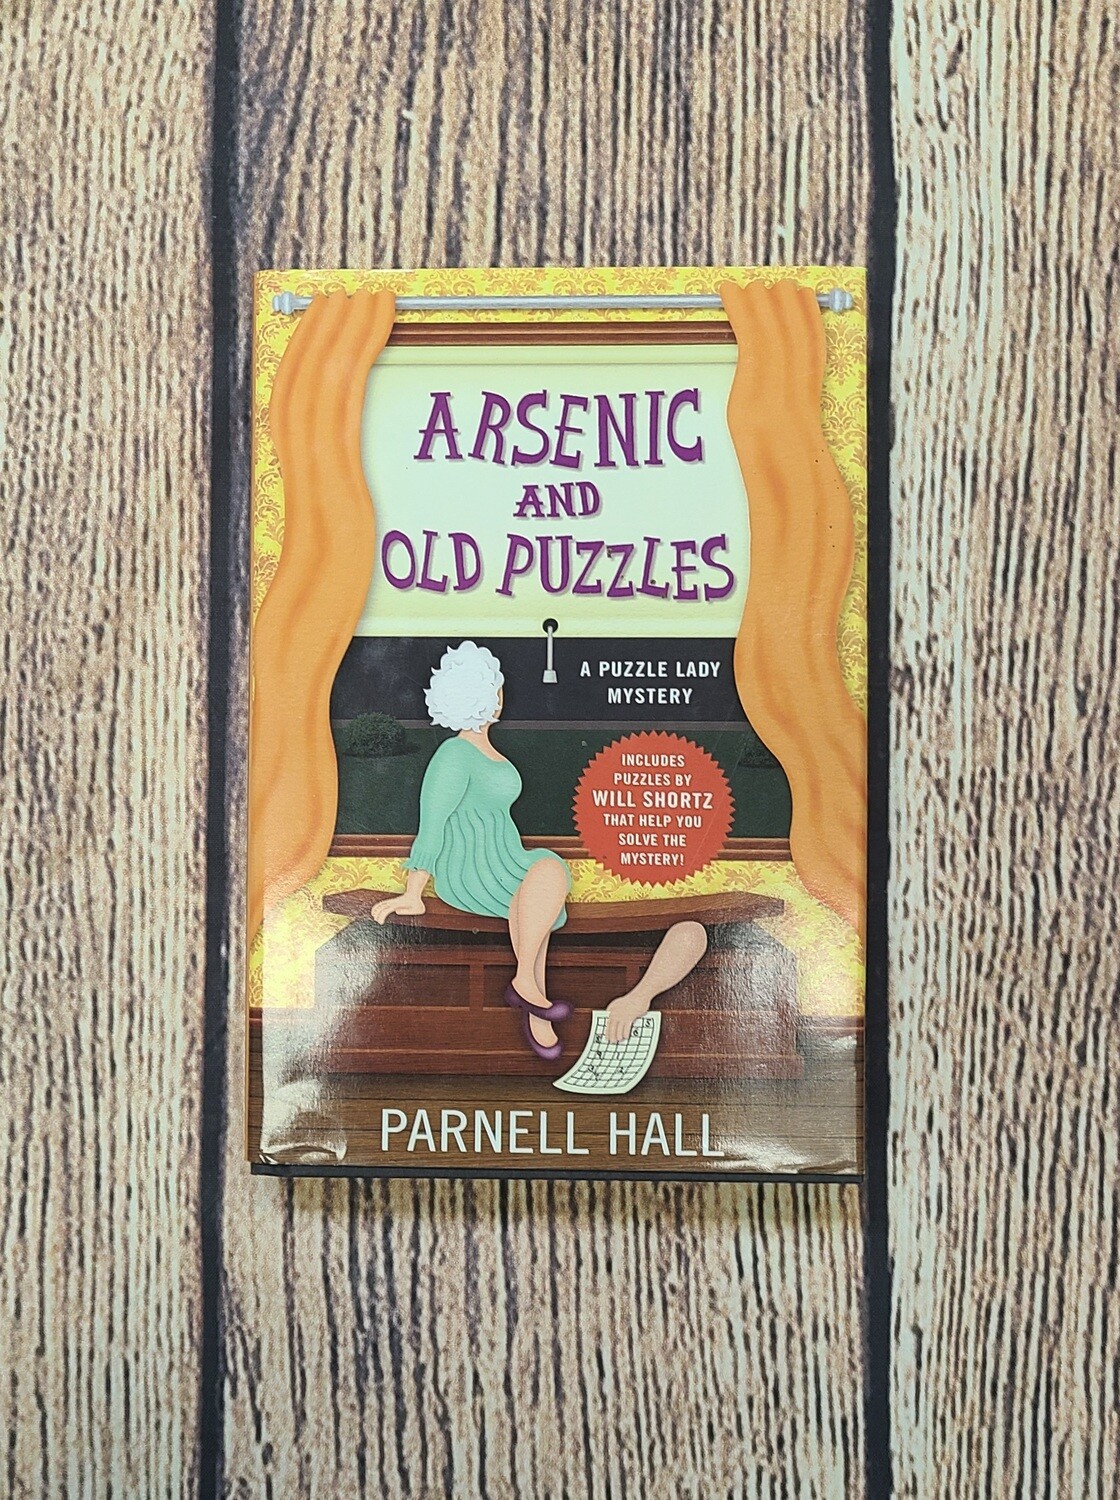 Arsenic and Old Puzzles by Parnell Hall